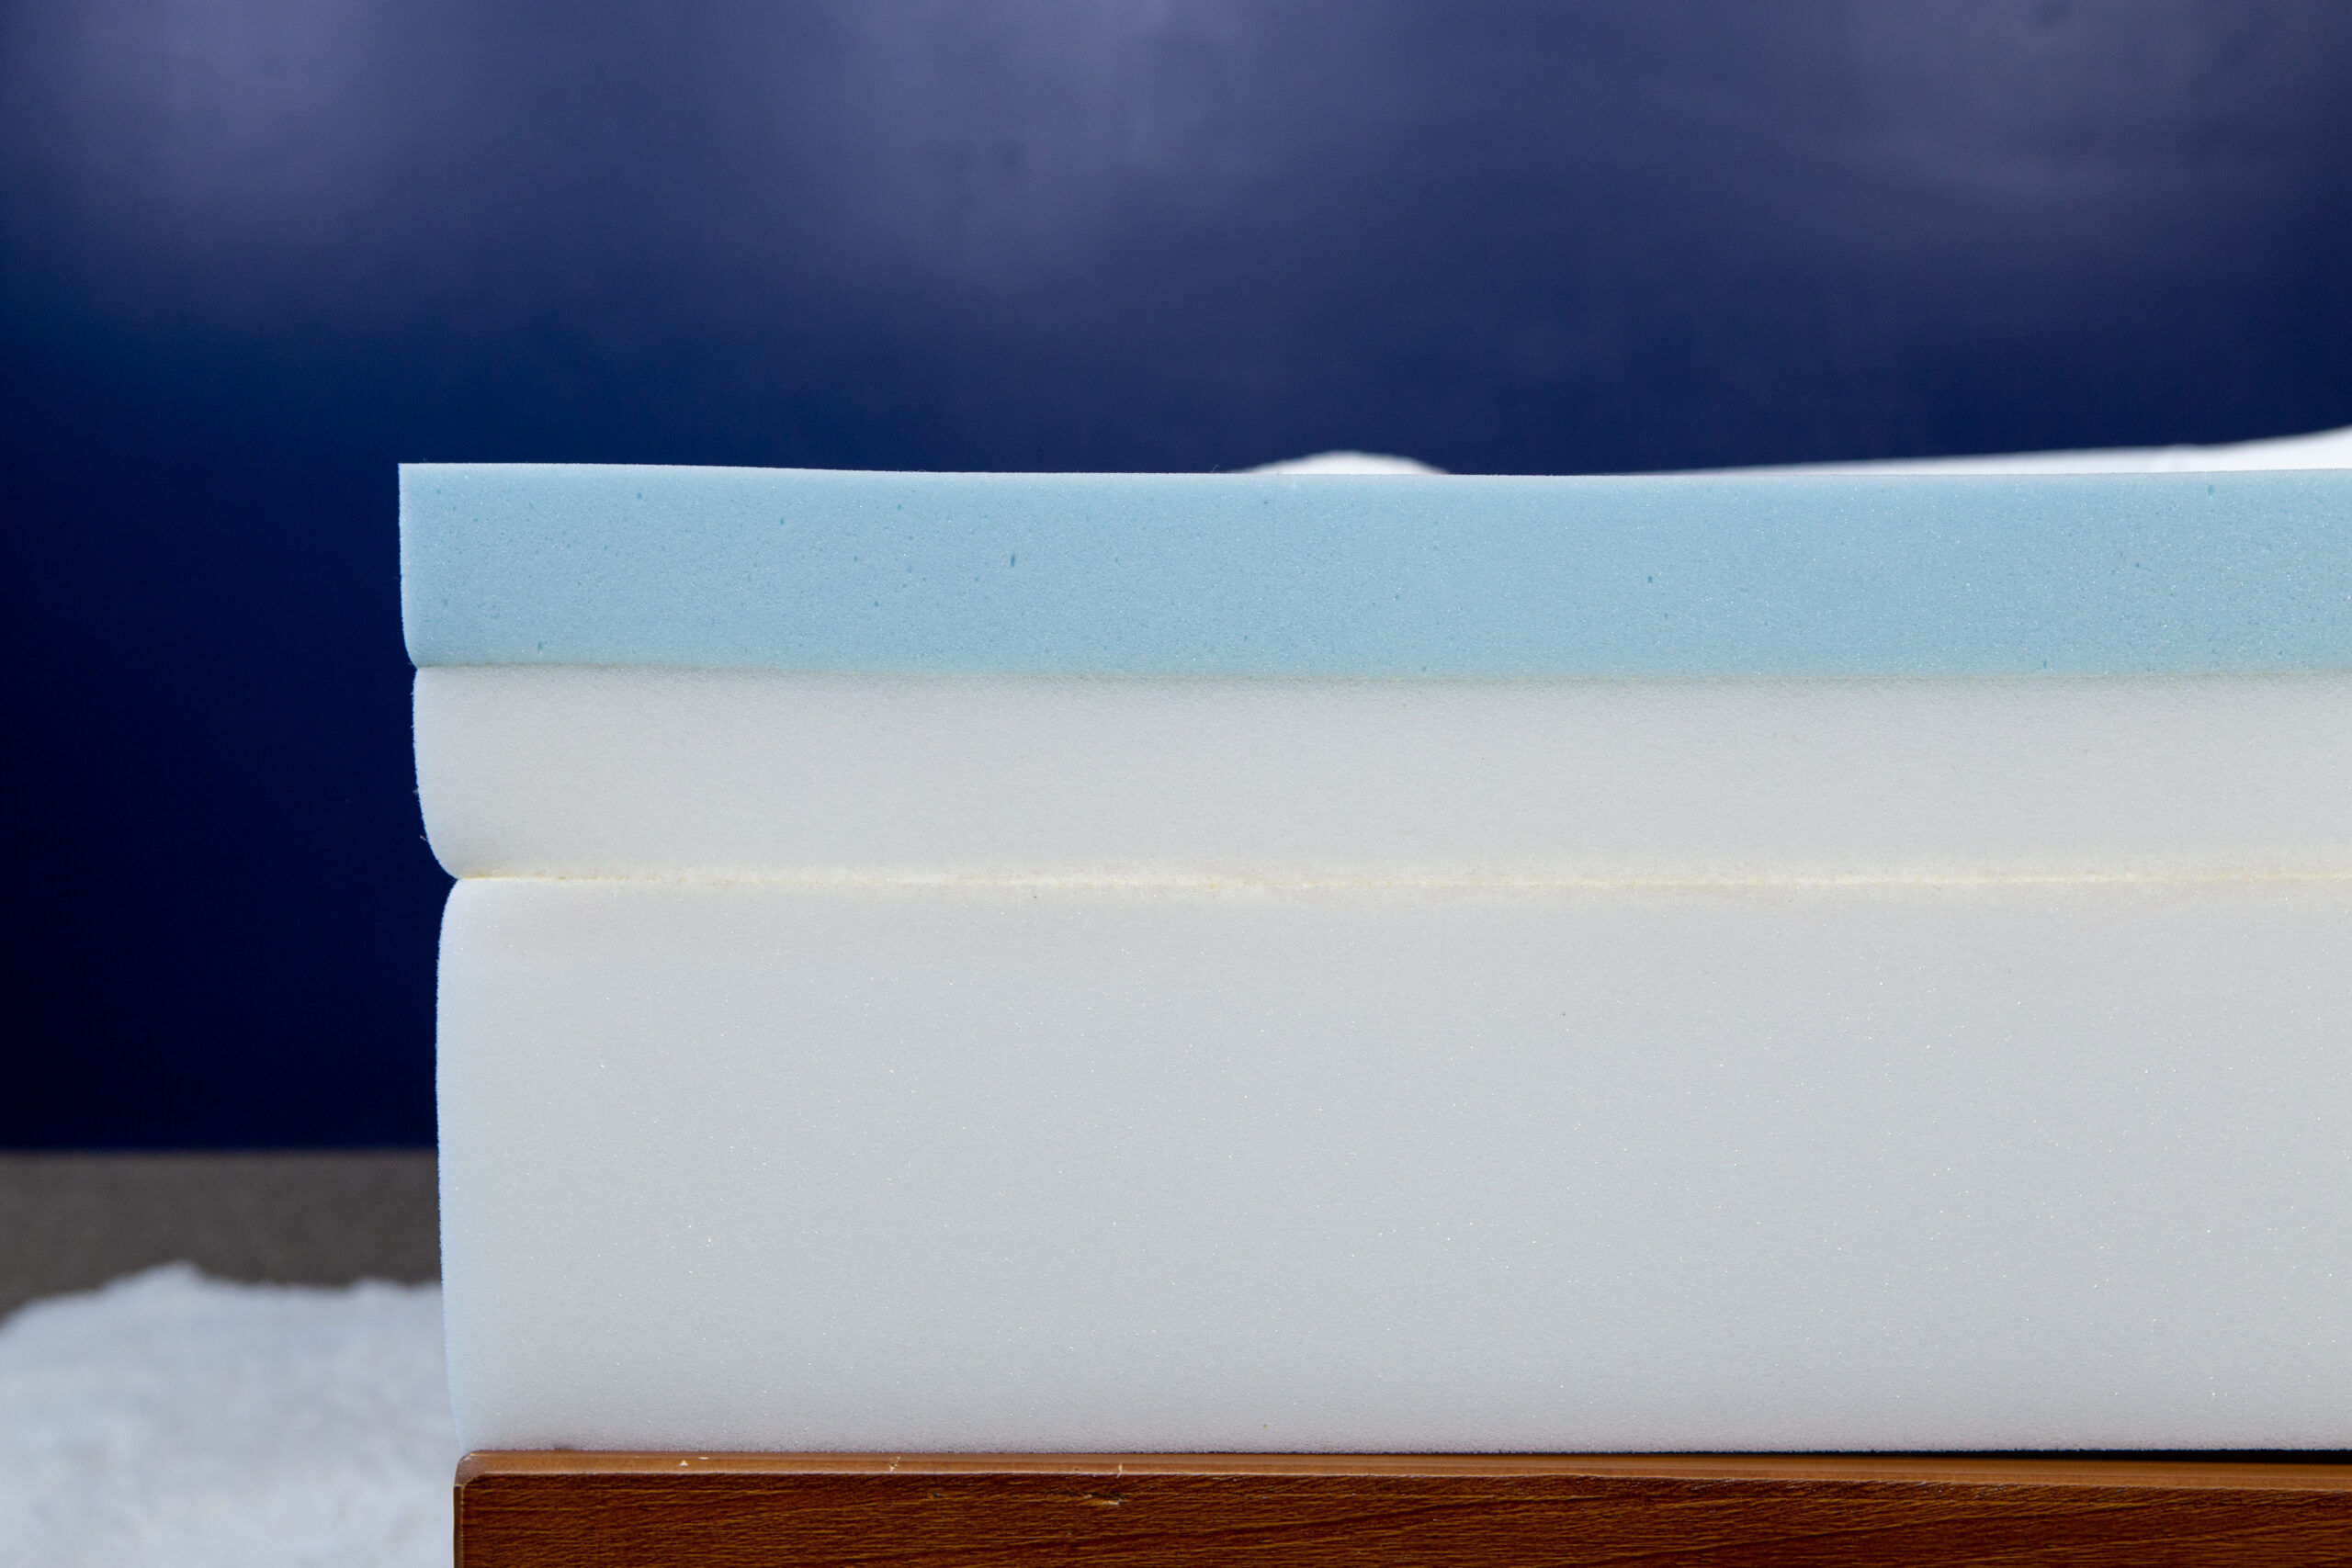 Image of the Douglas Original mattress layers on a bedframe without the cover and shot from a side angle.